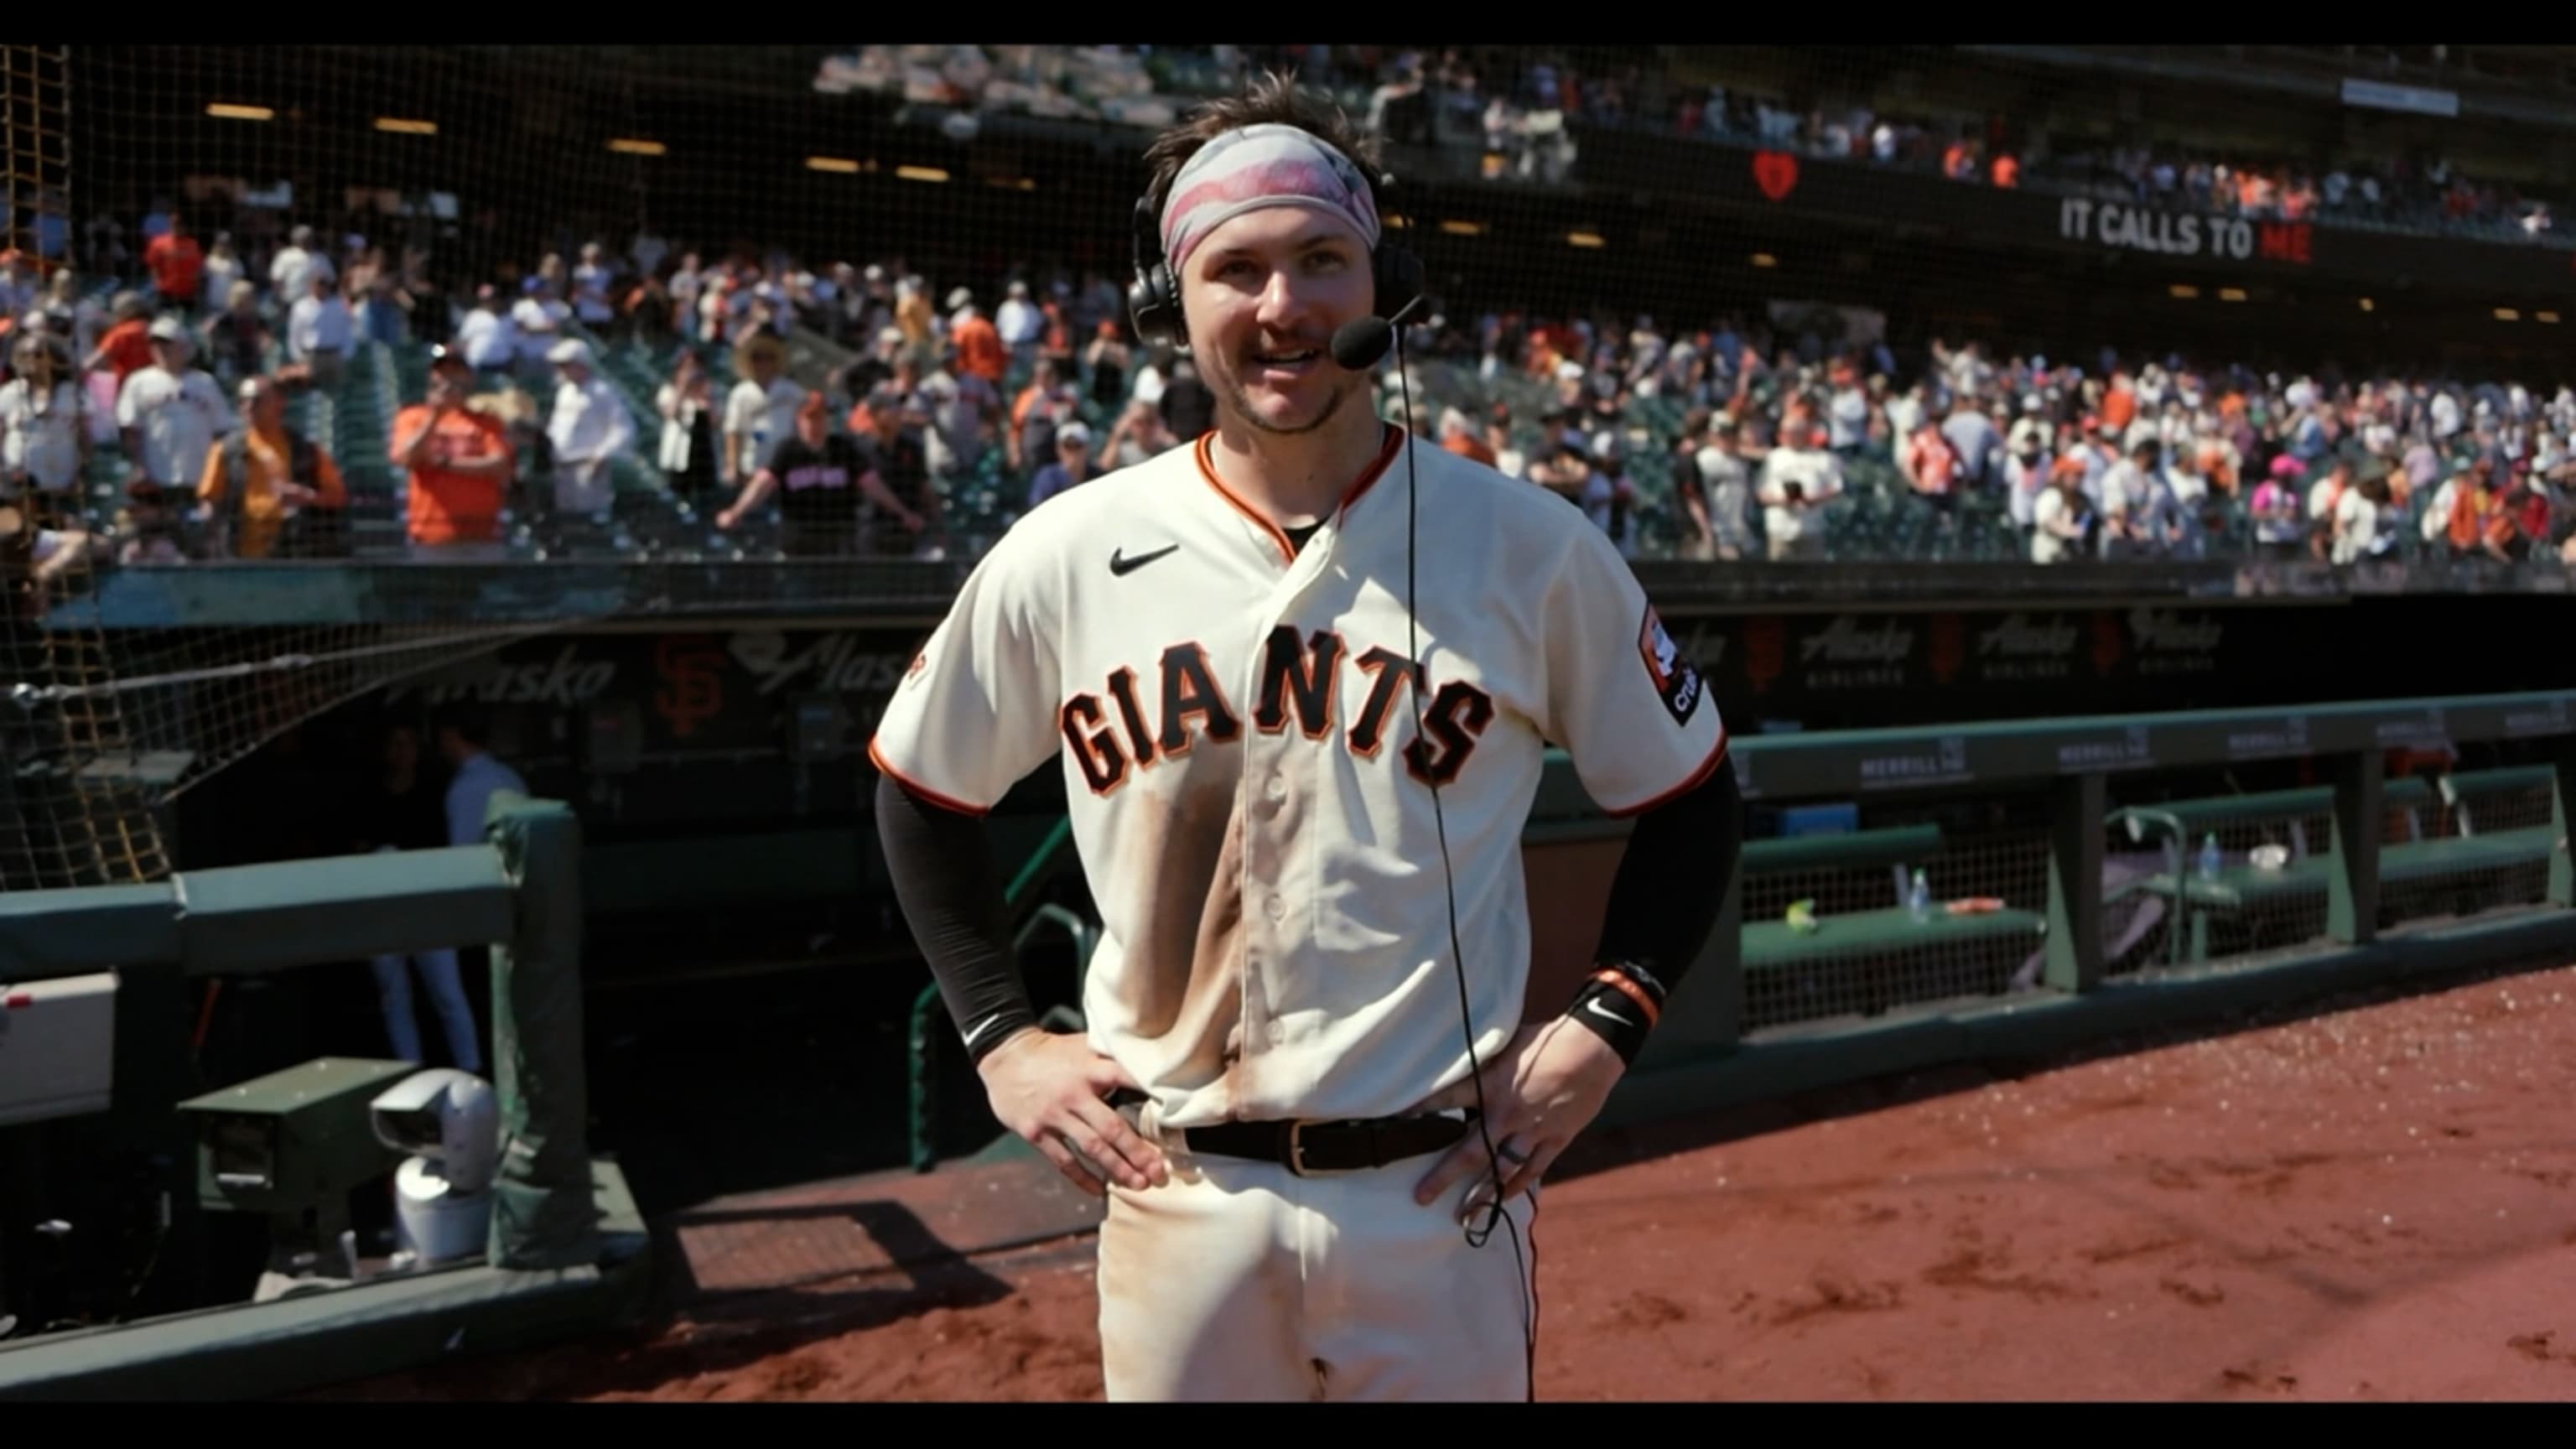 Bailey's 2-run homer in 10th gives Giants 3-2 win over Rangers